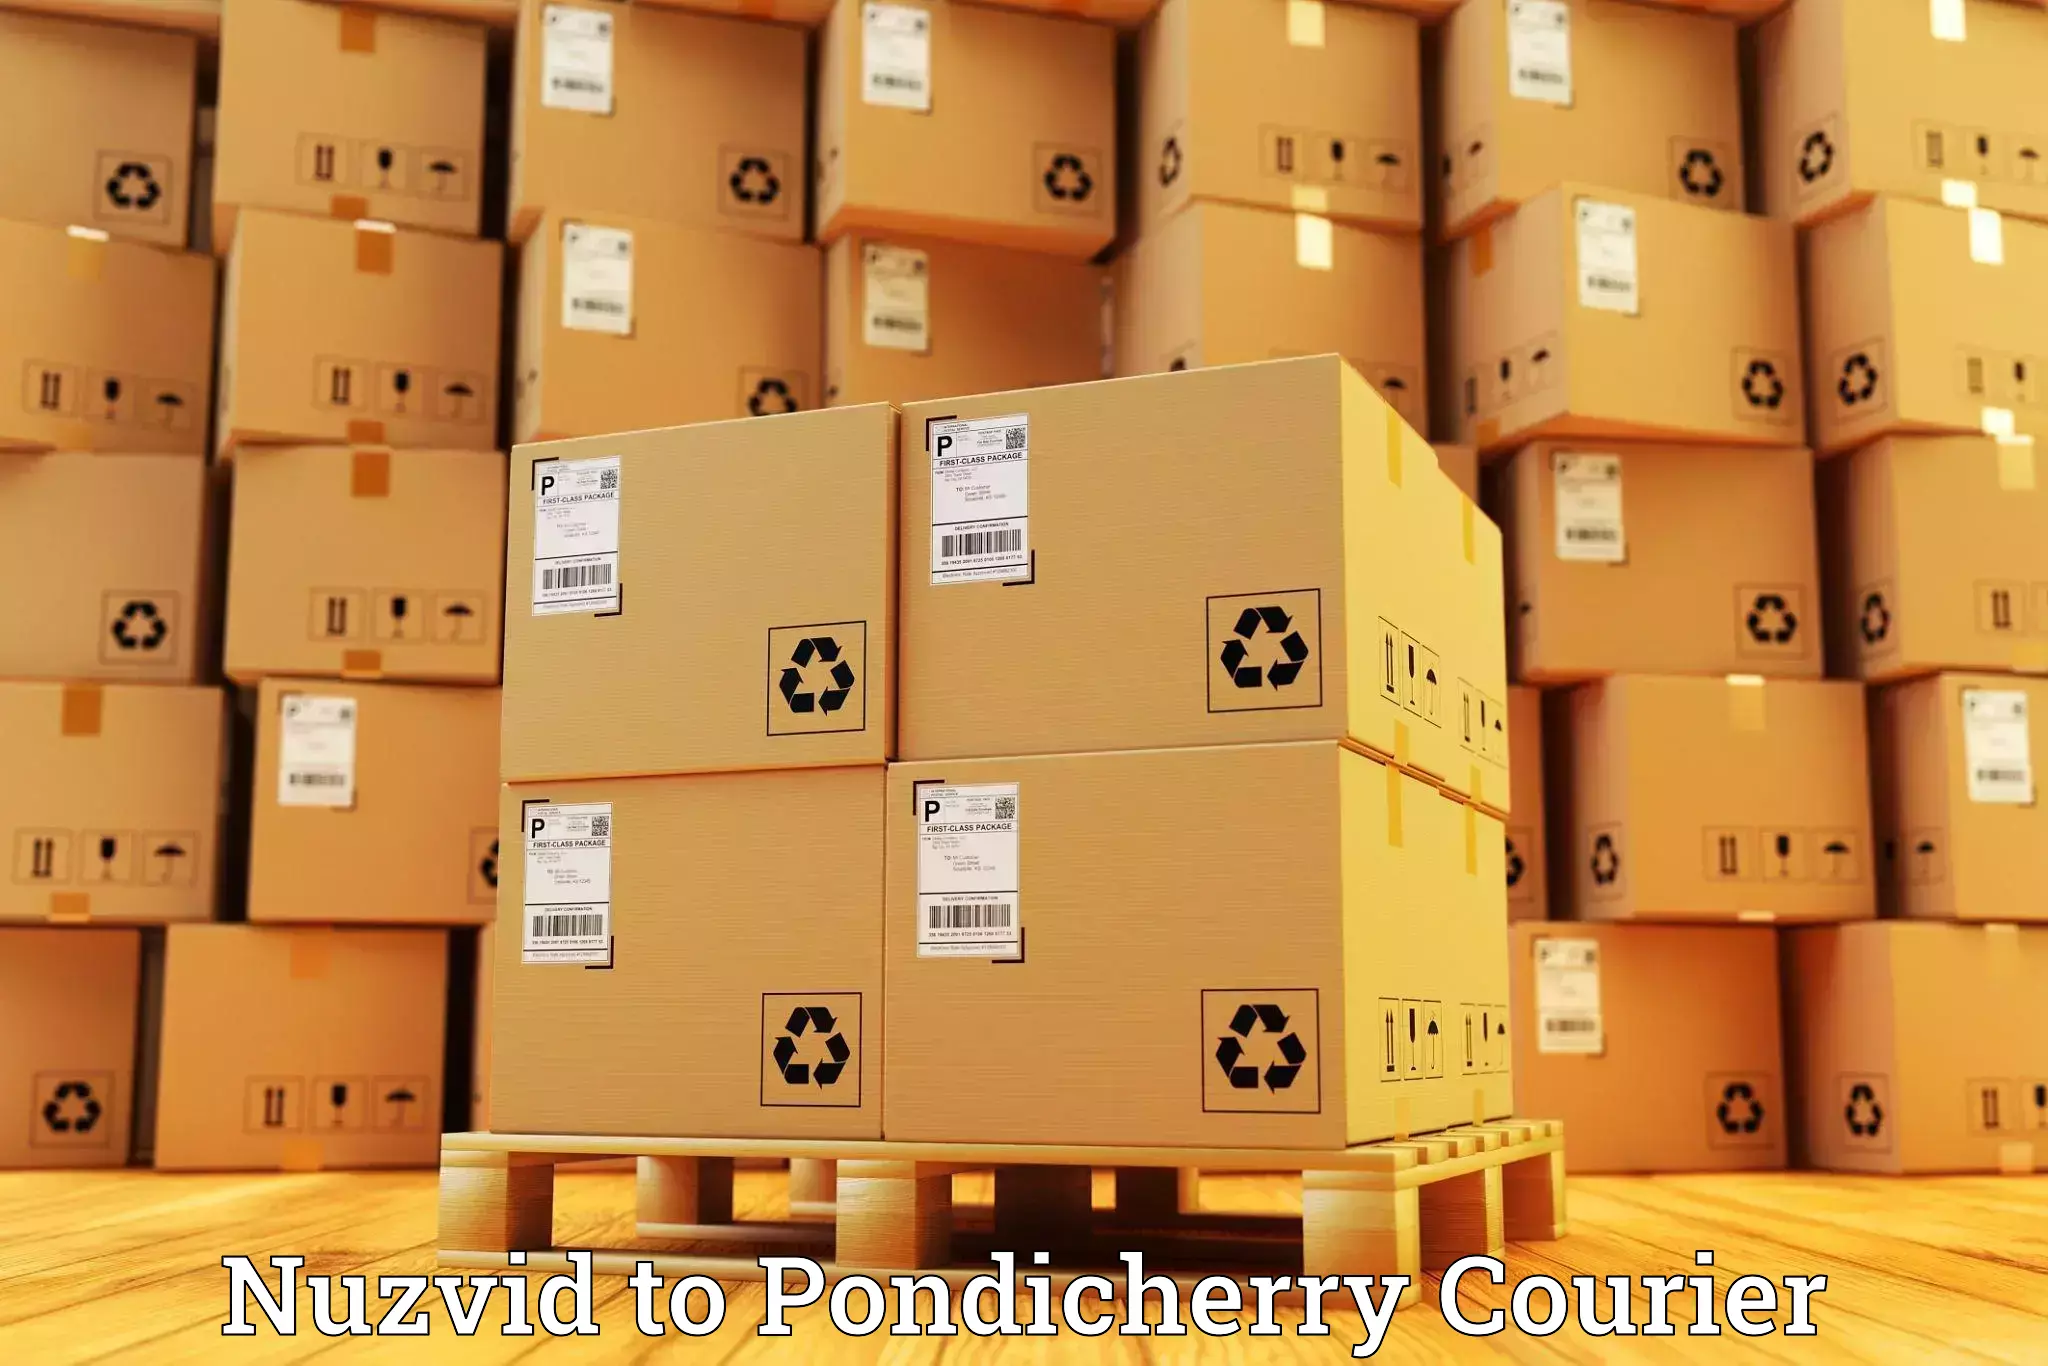 Package delivery network Nuzvid to Pondicherry